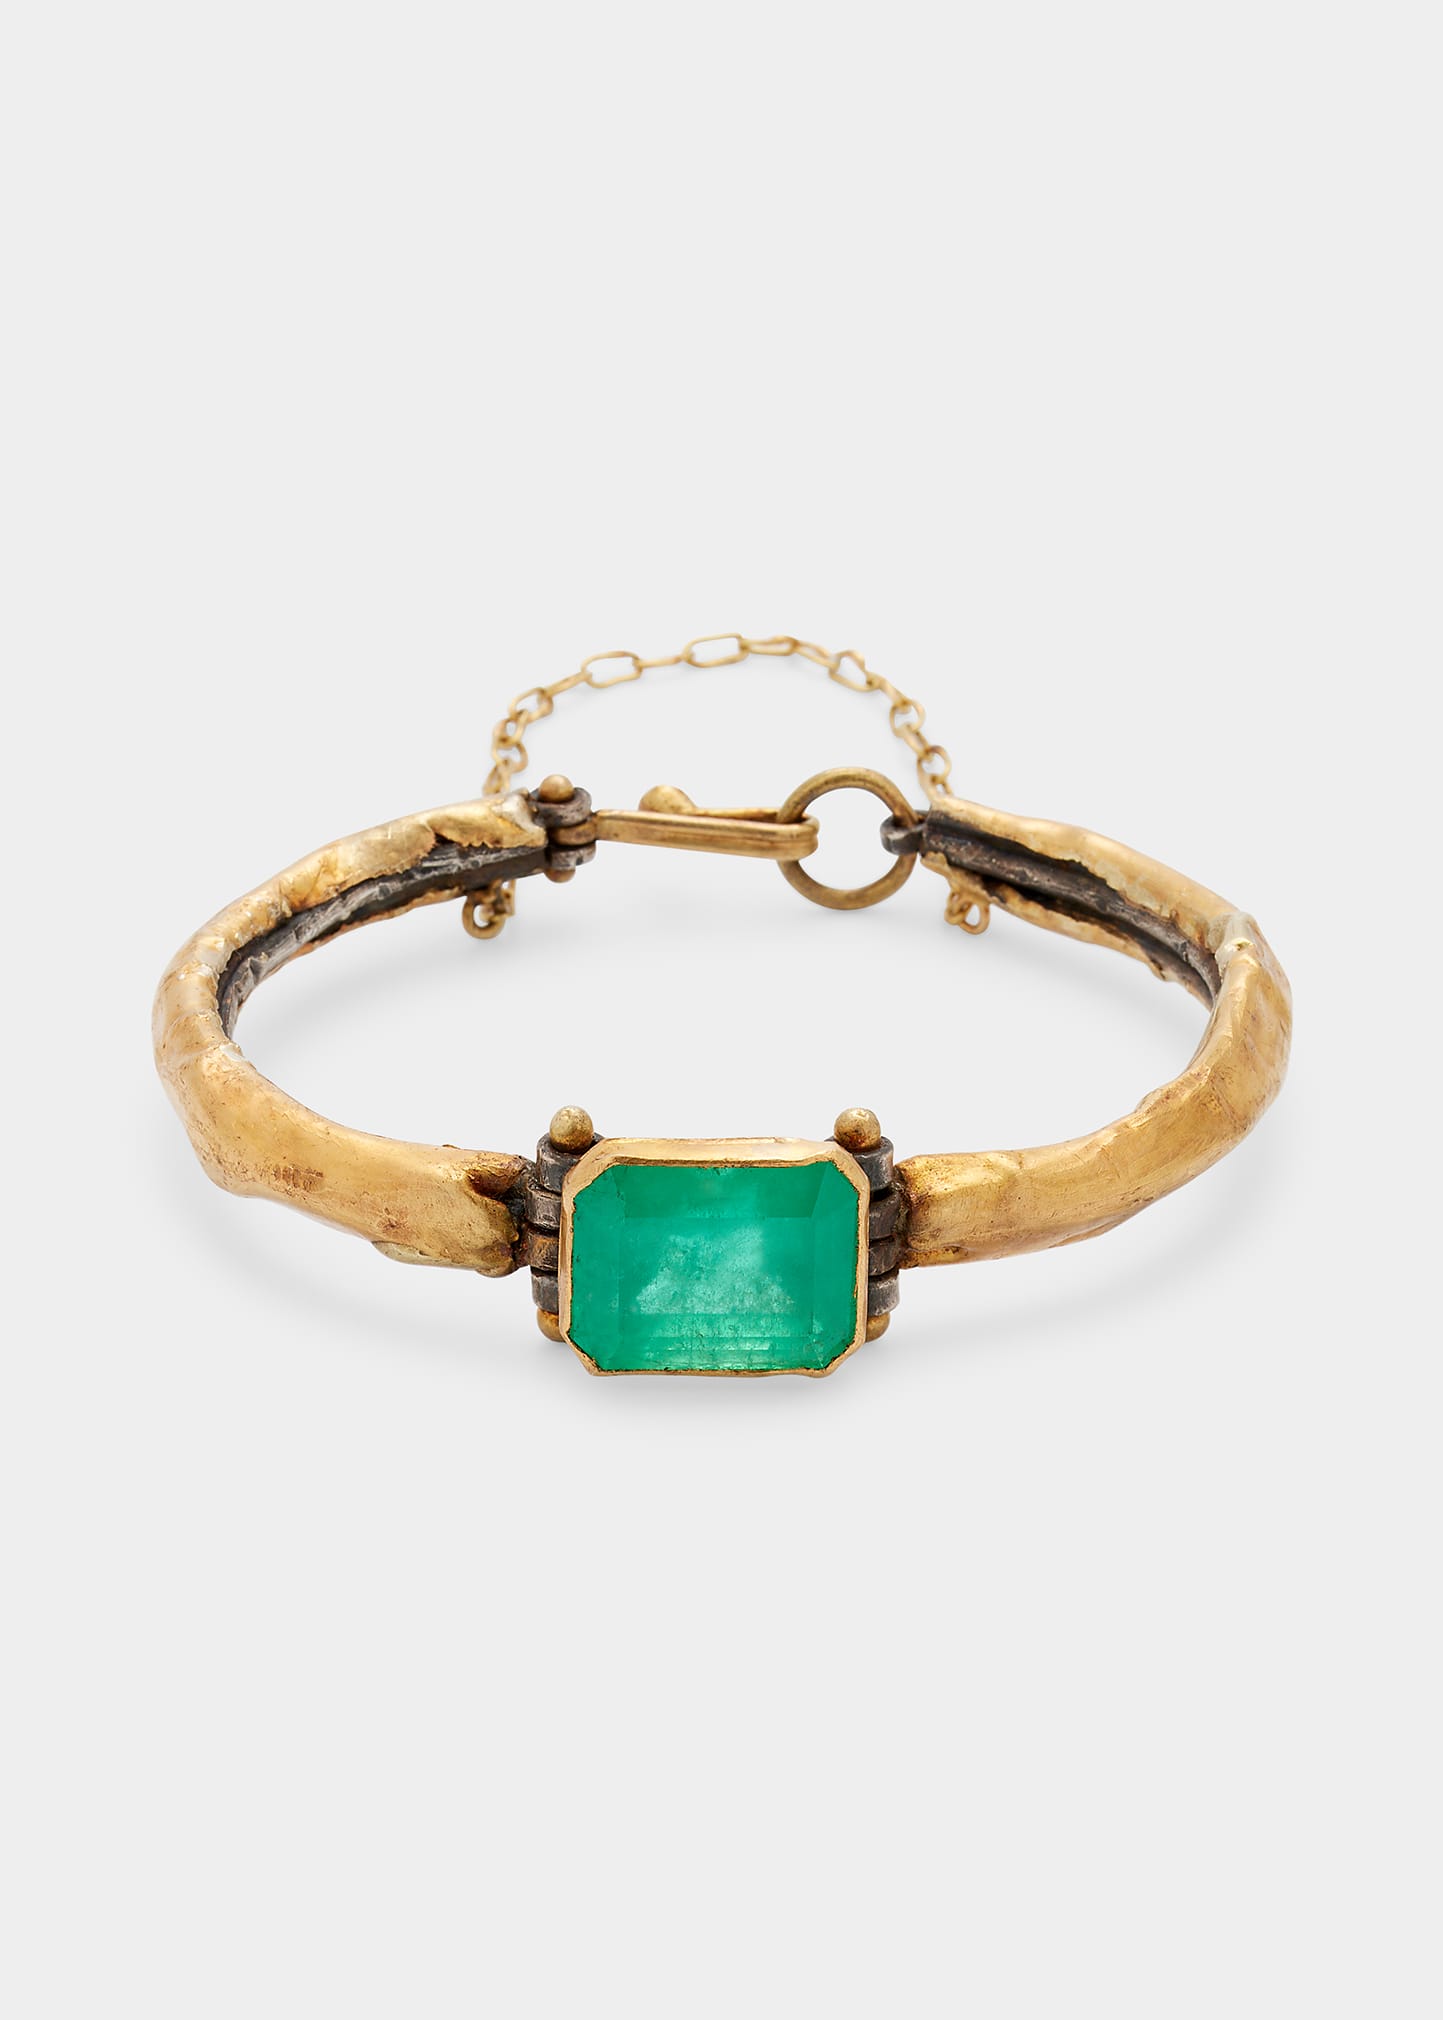 JUDY GEIB Colombian Emerald Bracelet in 22K Gold and Silver